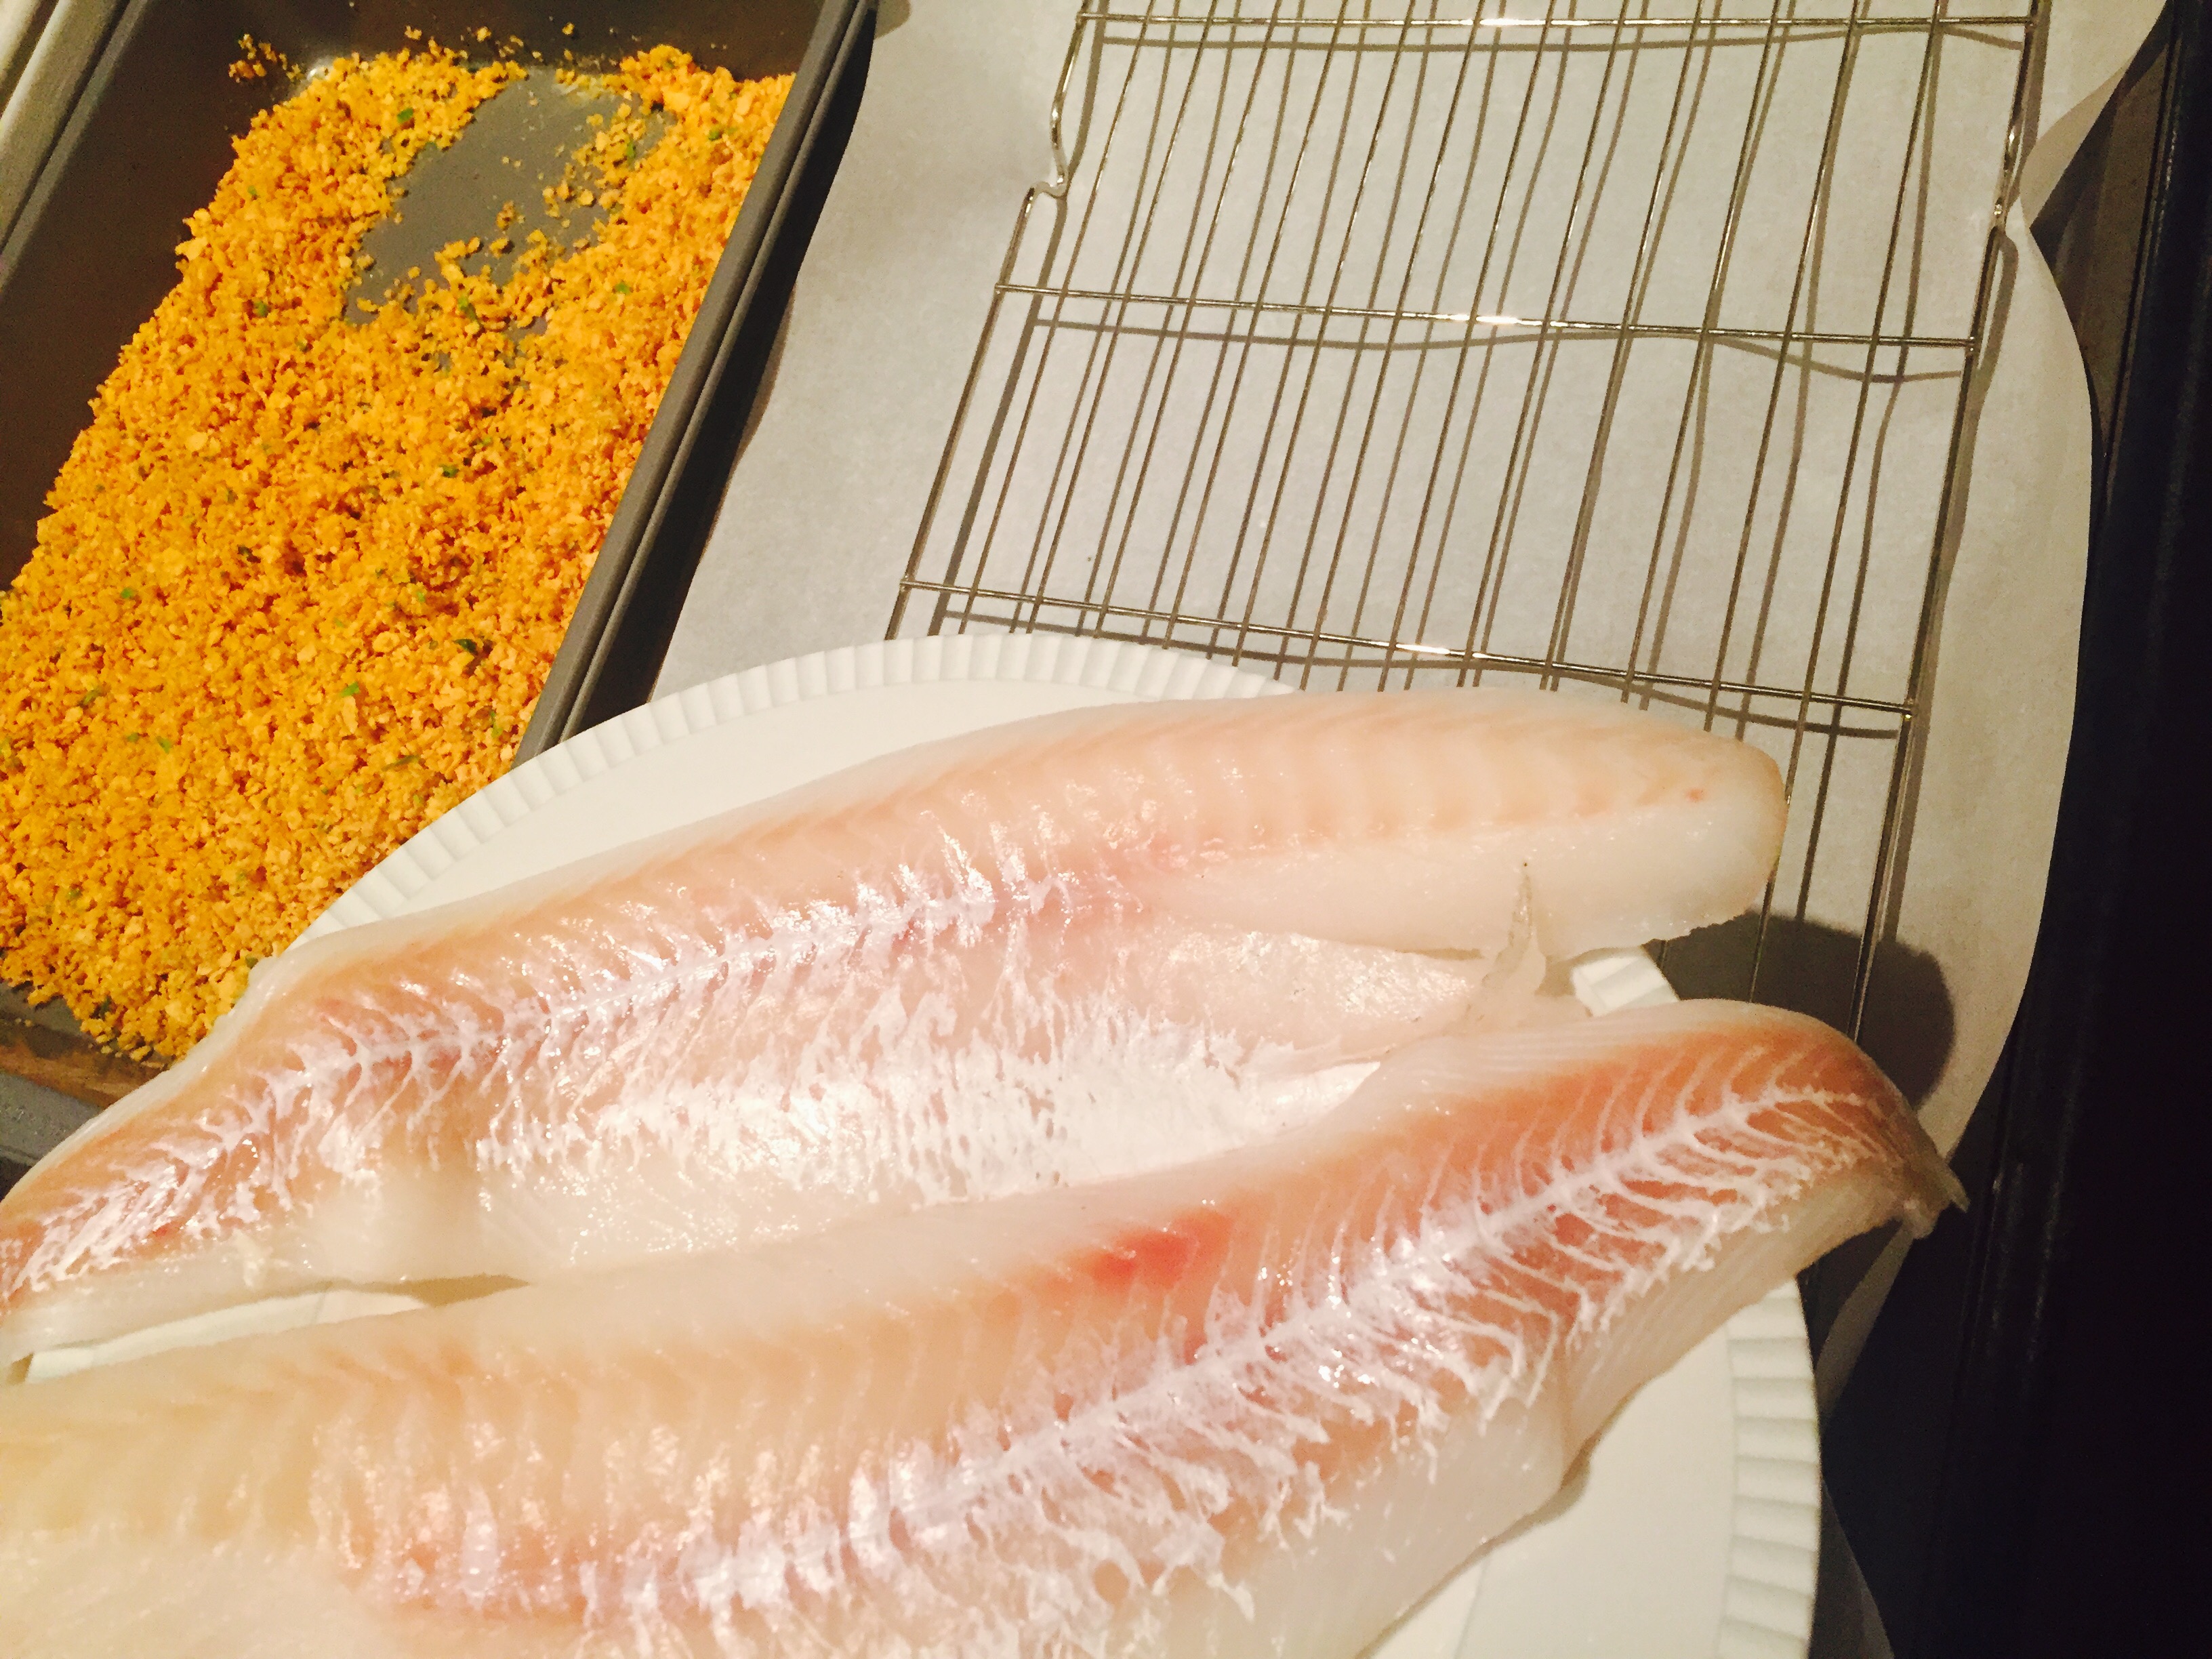 Beautiful fresh cod filets ready to be coated in crispy ground cereal with good olive oil, lemon zest and fresh parsley